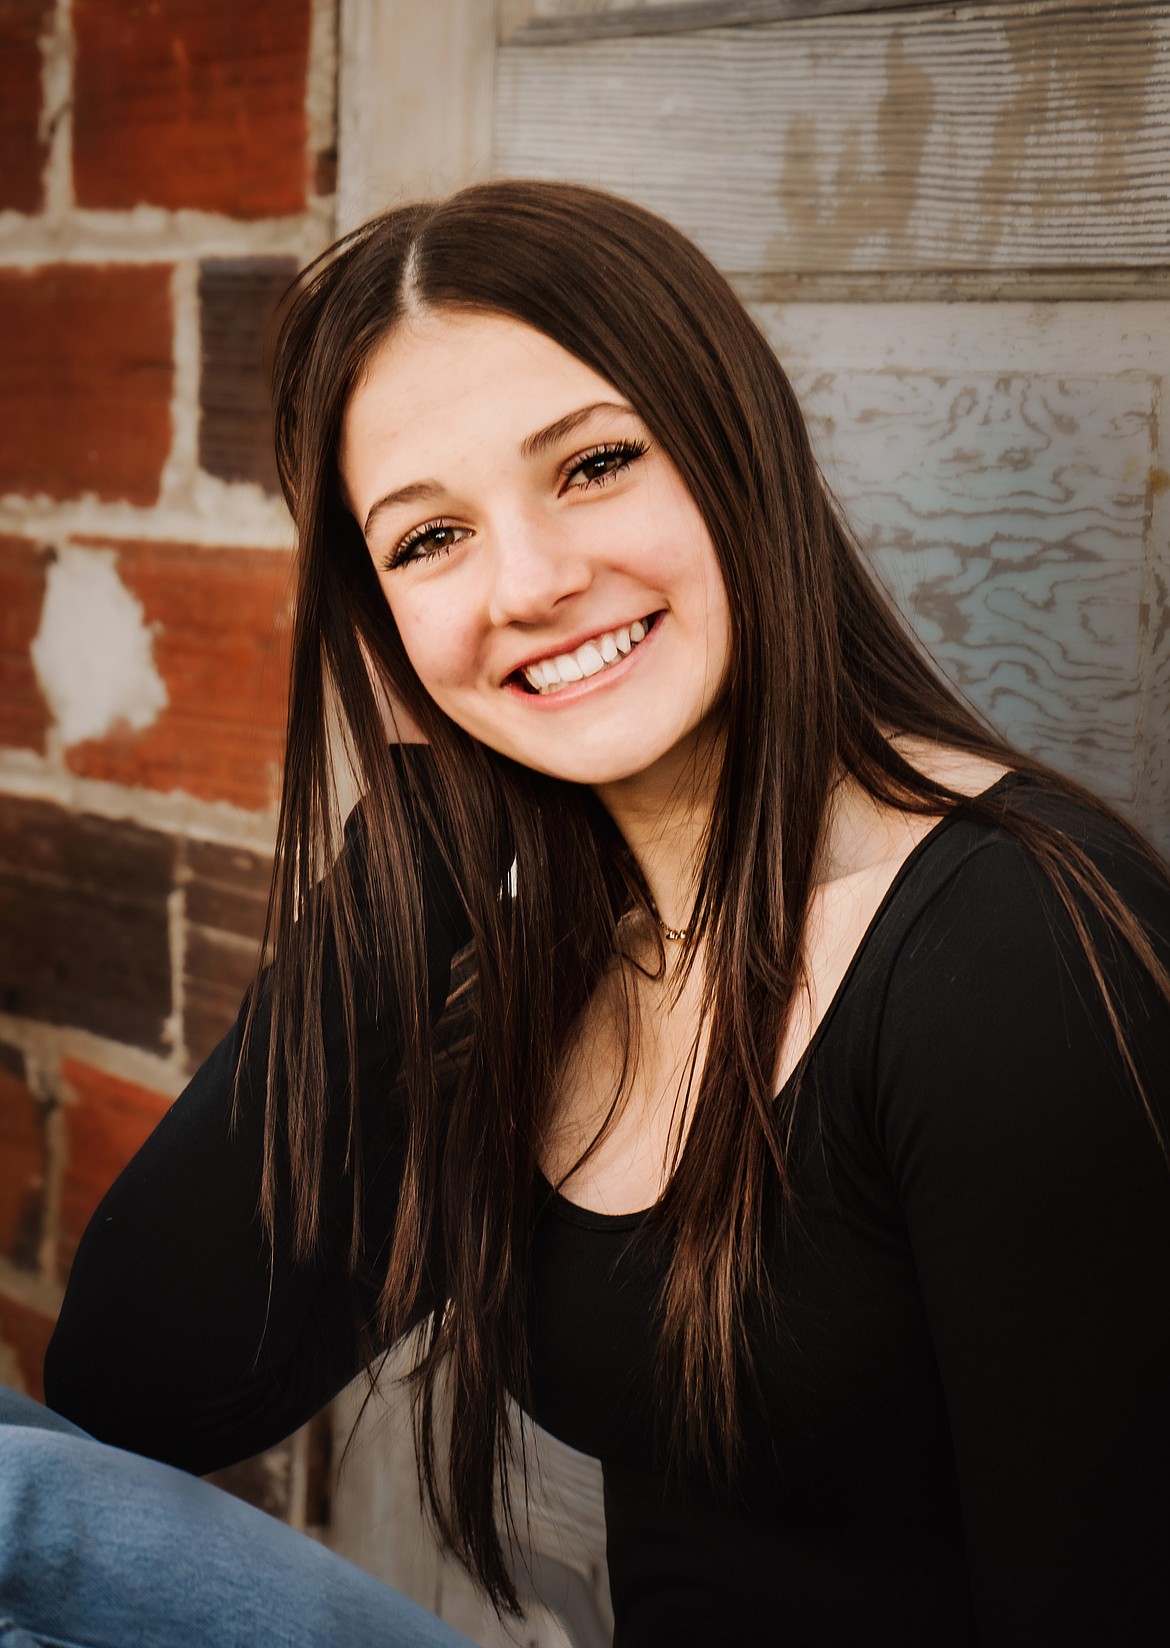 Alexandra Fodge is participant #14 for the Bonners Ferry DYW program.